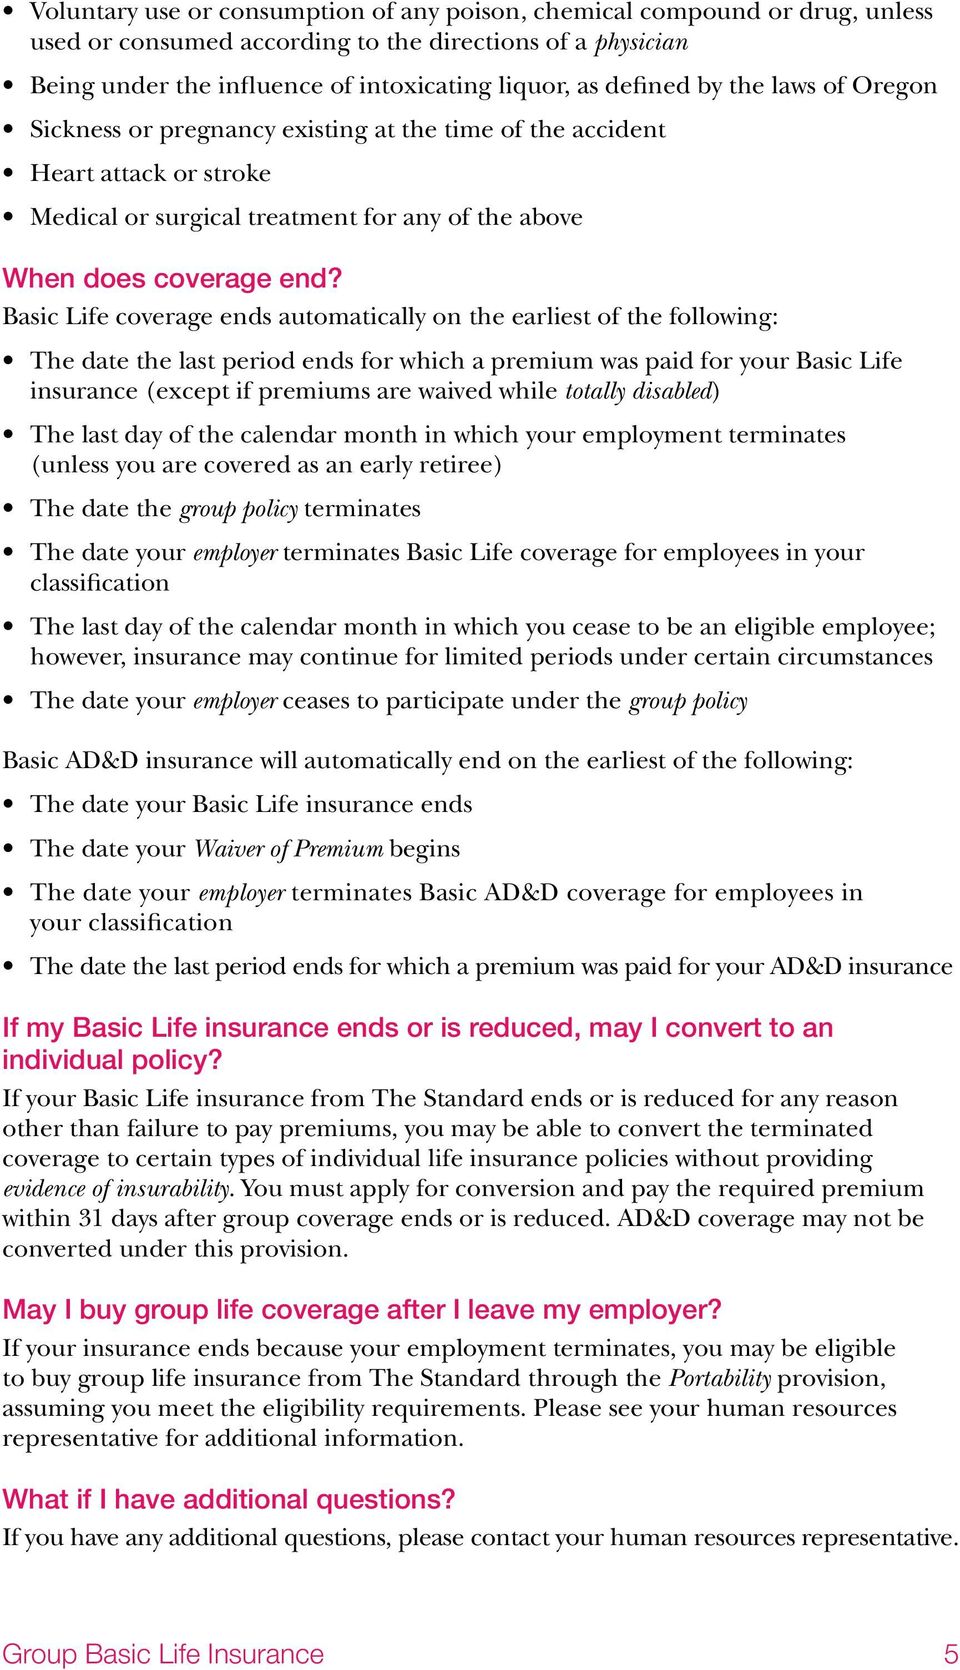 Basic Life coverage ends automatically on the earliest of the following: The date the last period ends for which a premium was paid for your Basic Life insurance (except if premiums are waived while